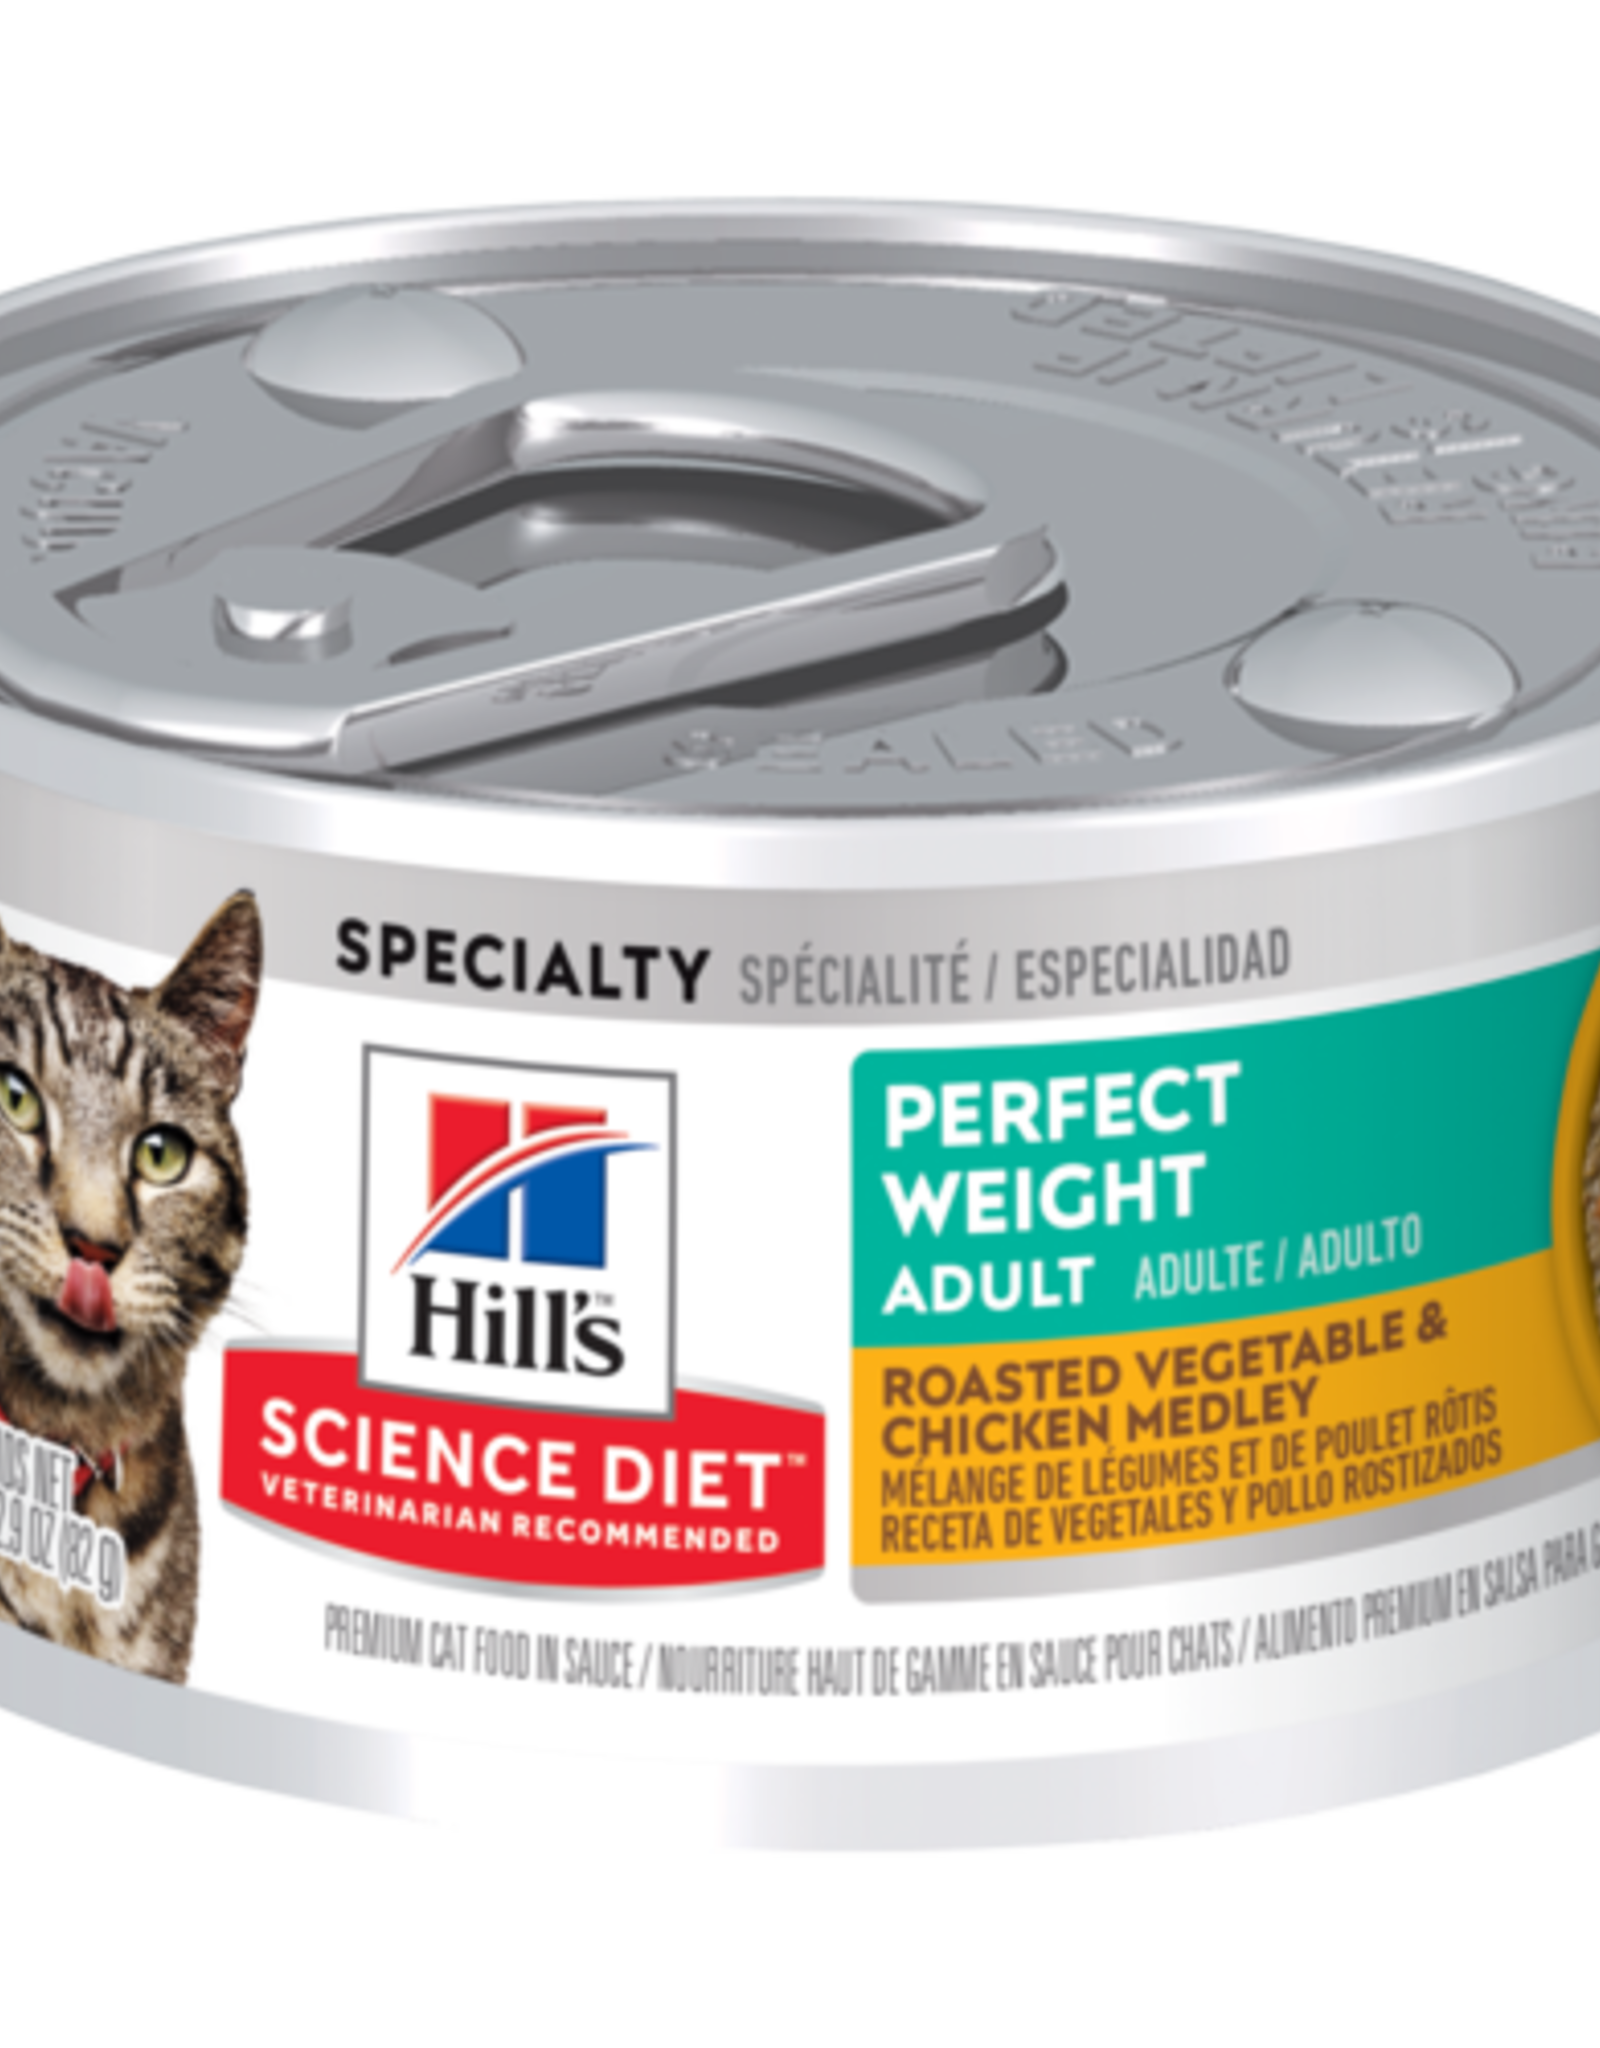 Hill's Science Pet Hill's Science Diet Adult Perfect Weight Roasted Vegetable & Chicken Medley Cat Food 2.9 oz (10876)